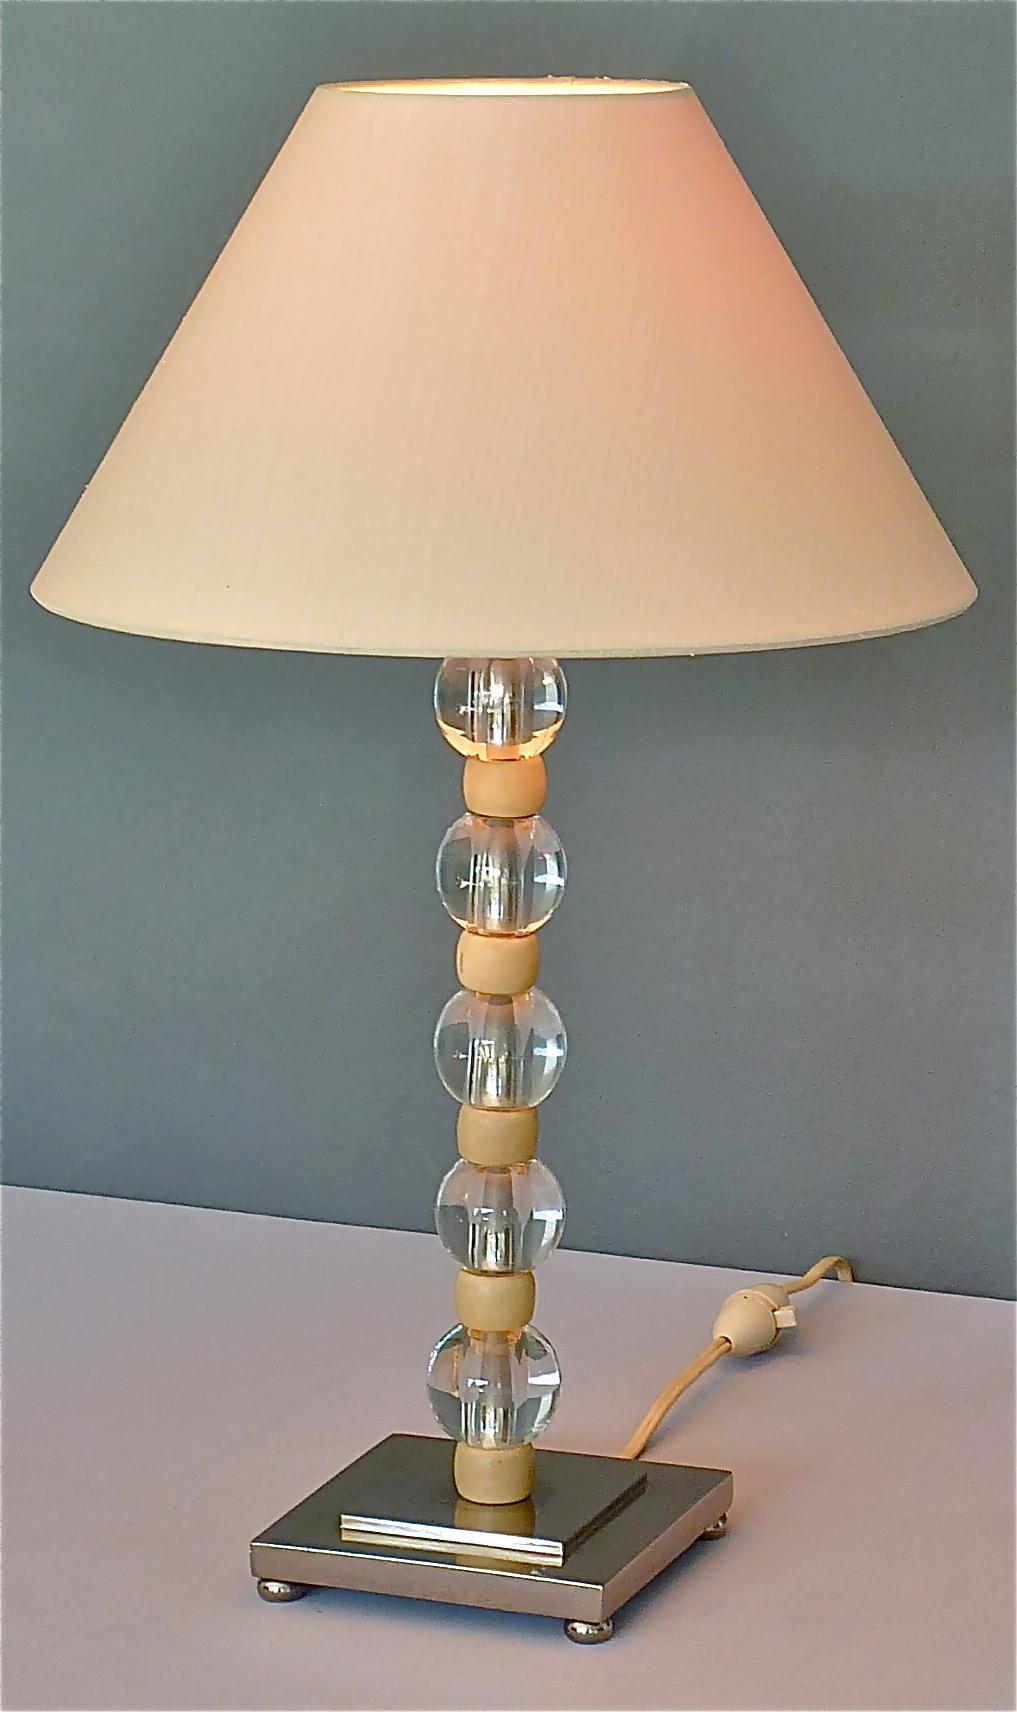 French Art Deco Adnet Baccarat Style Table Lamp Chrome Glass Ivory Color 1930s For Sale 8